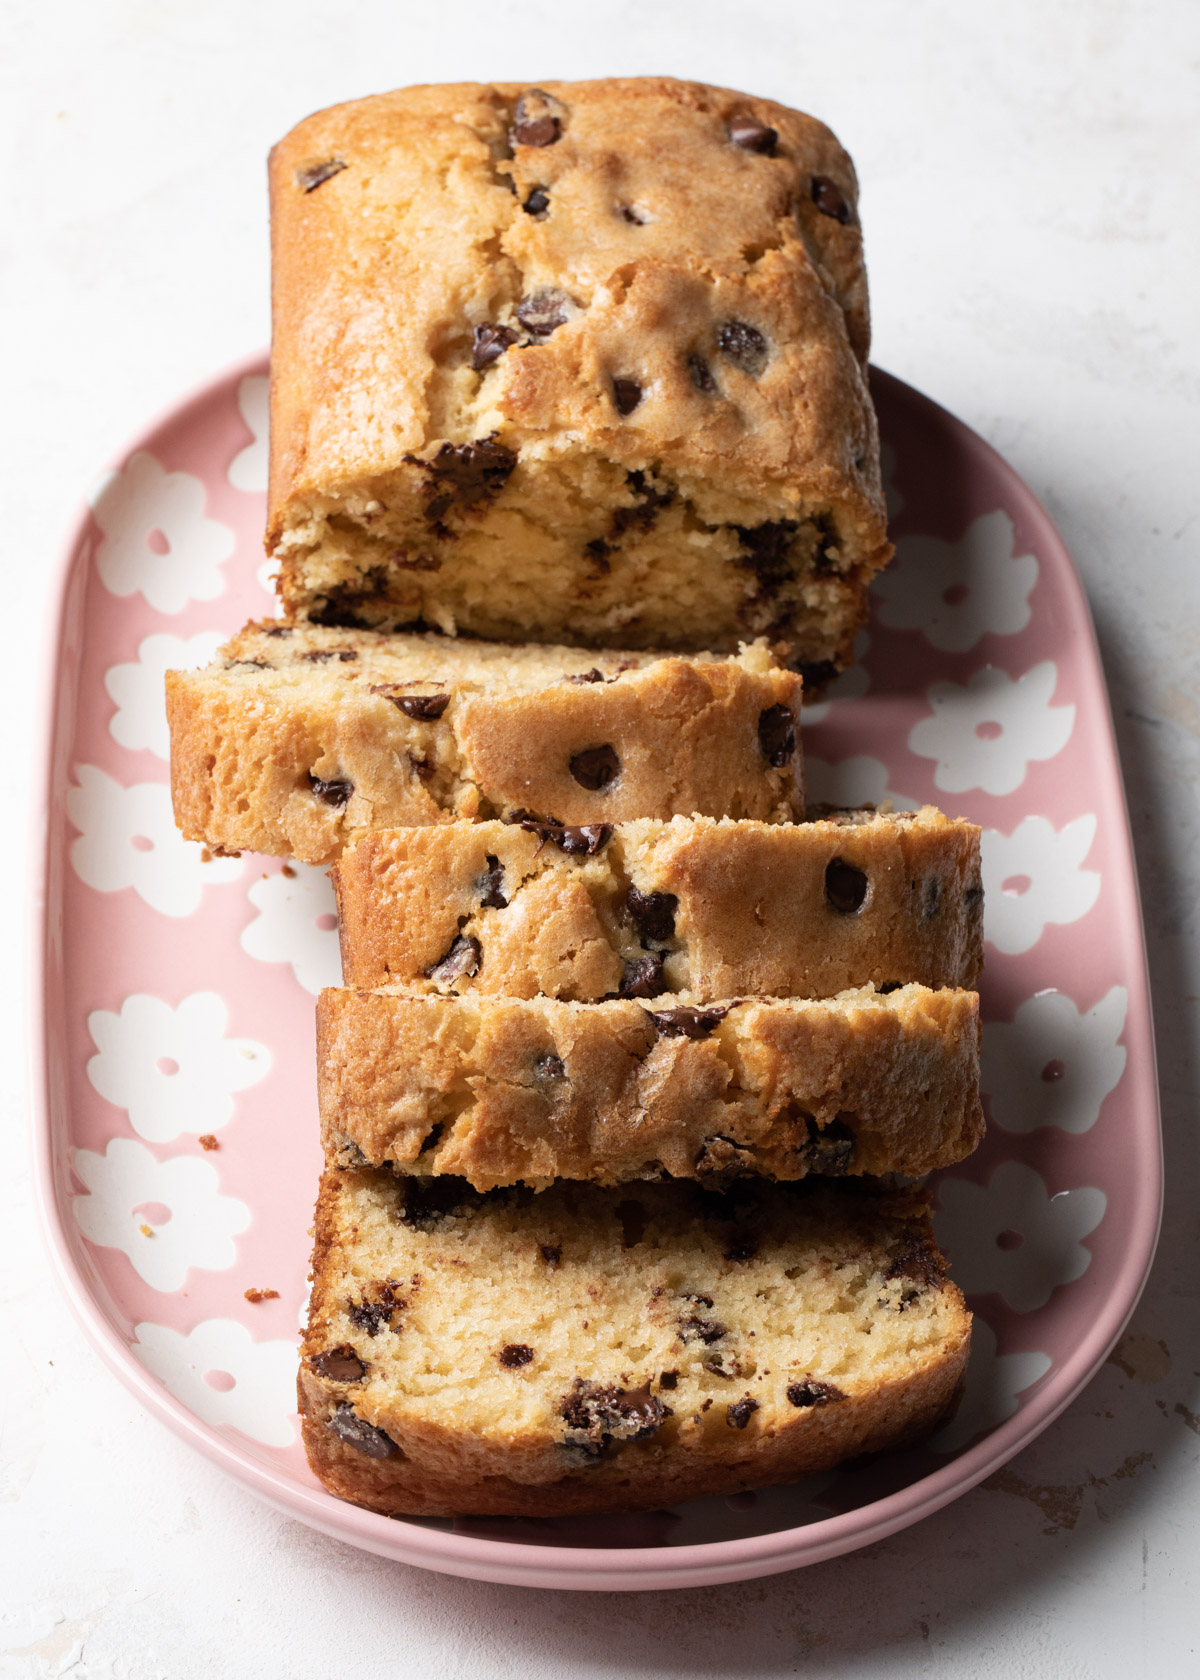 A full platter of slices of Chocolate Chip Pound Cake